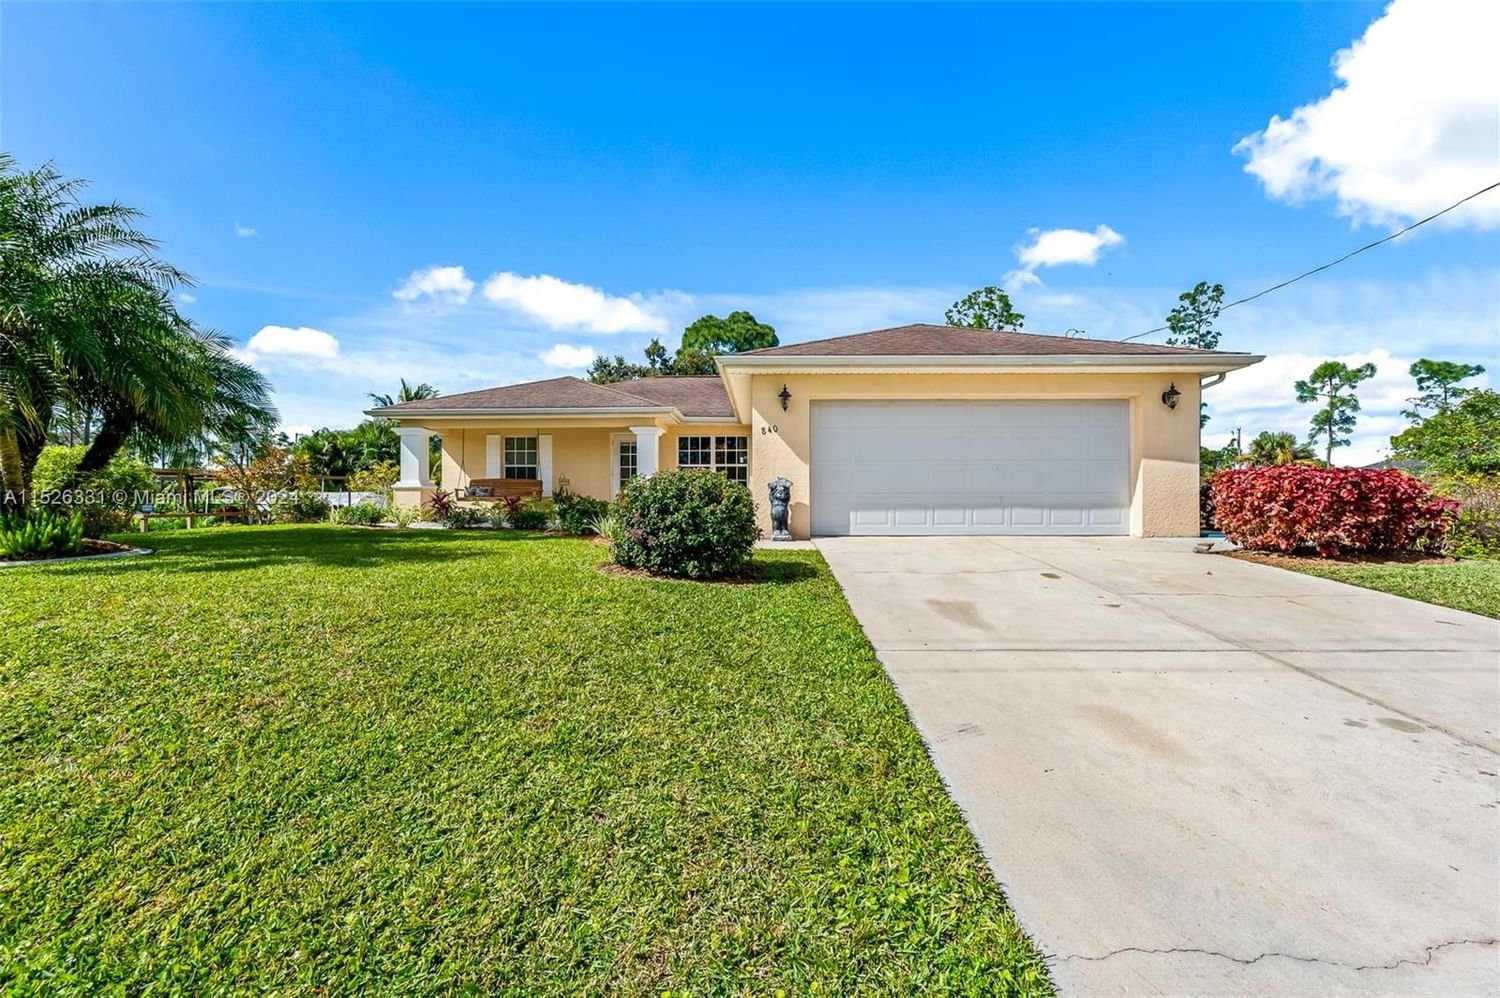 Real estate property located at 840 Harbour Ave, Lee County, LEHIGH ACRES, Lehigh Acres, FL